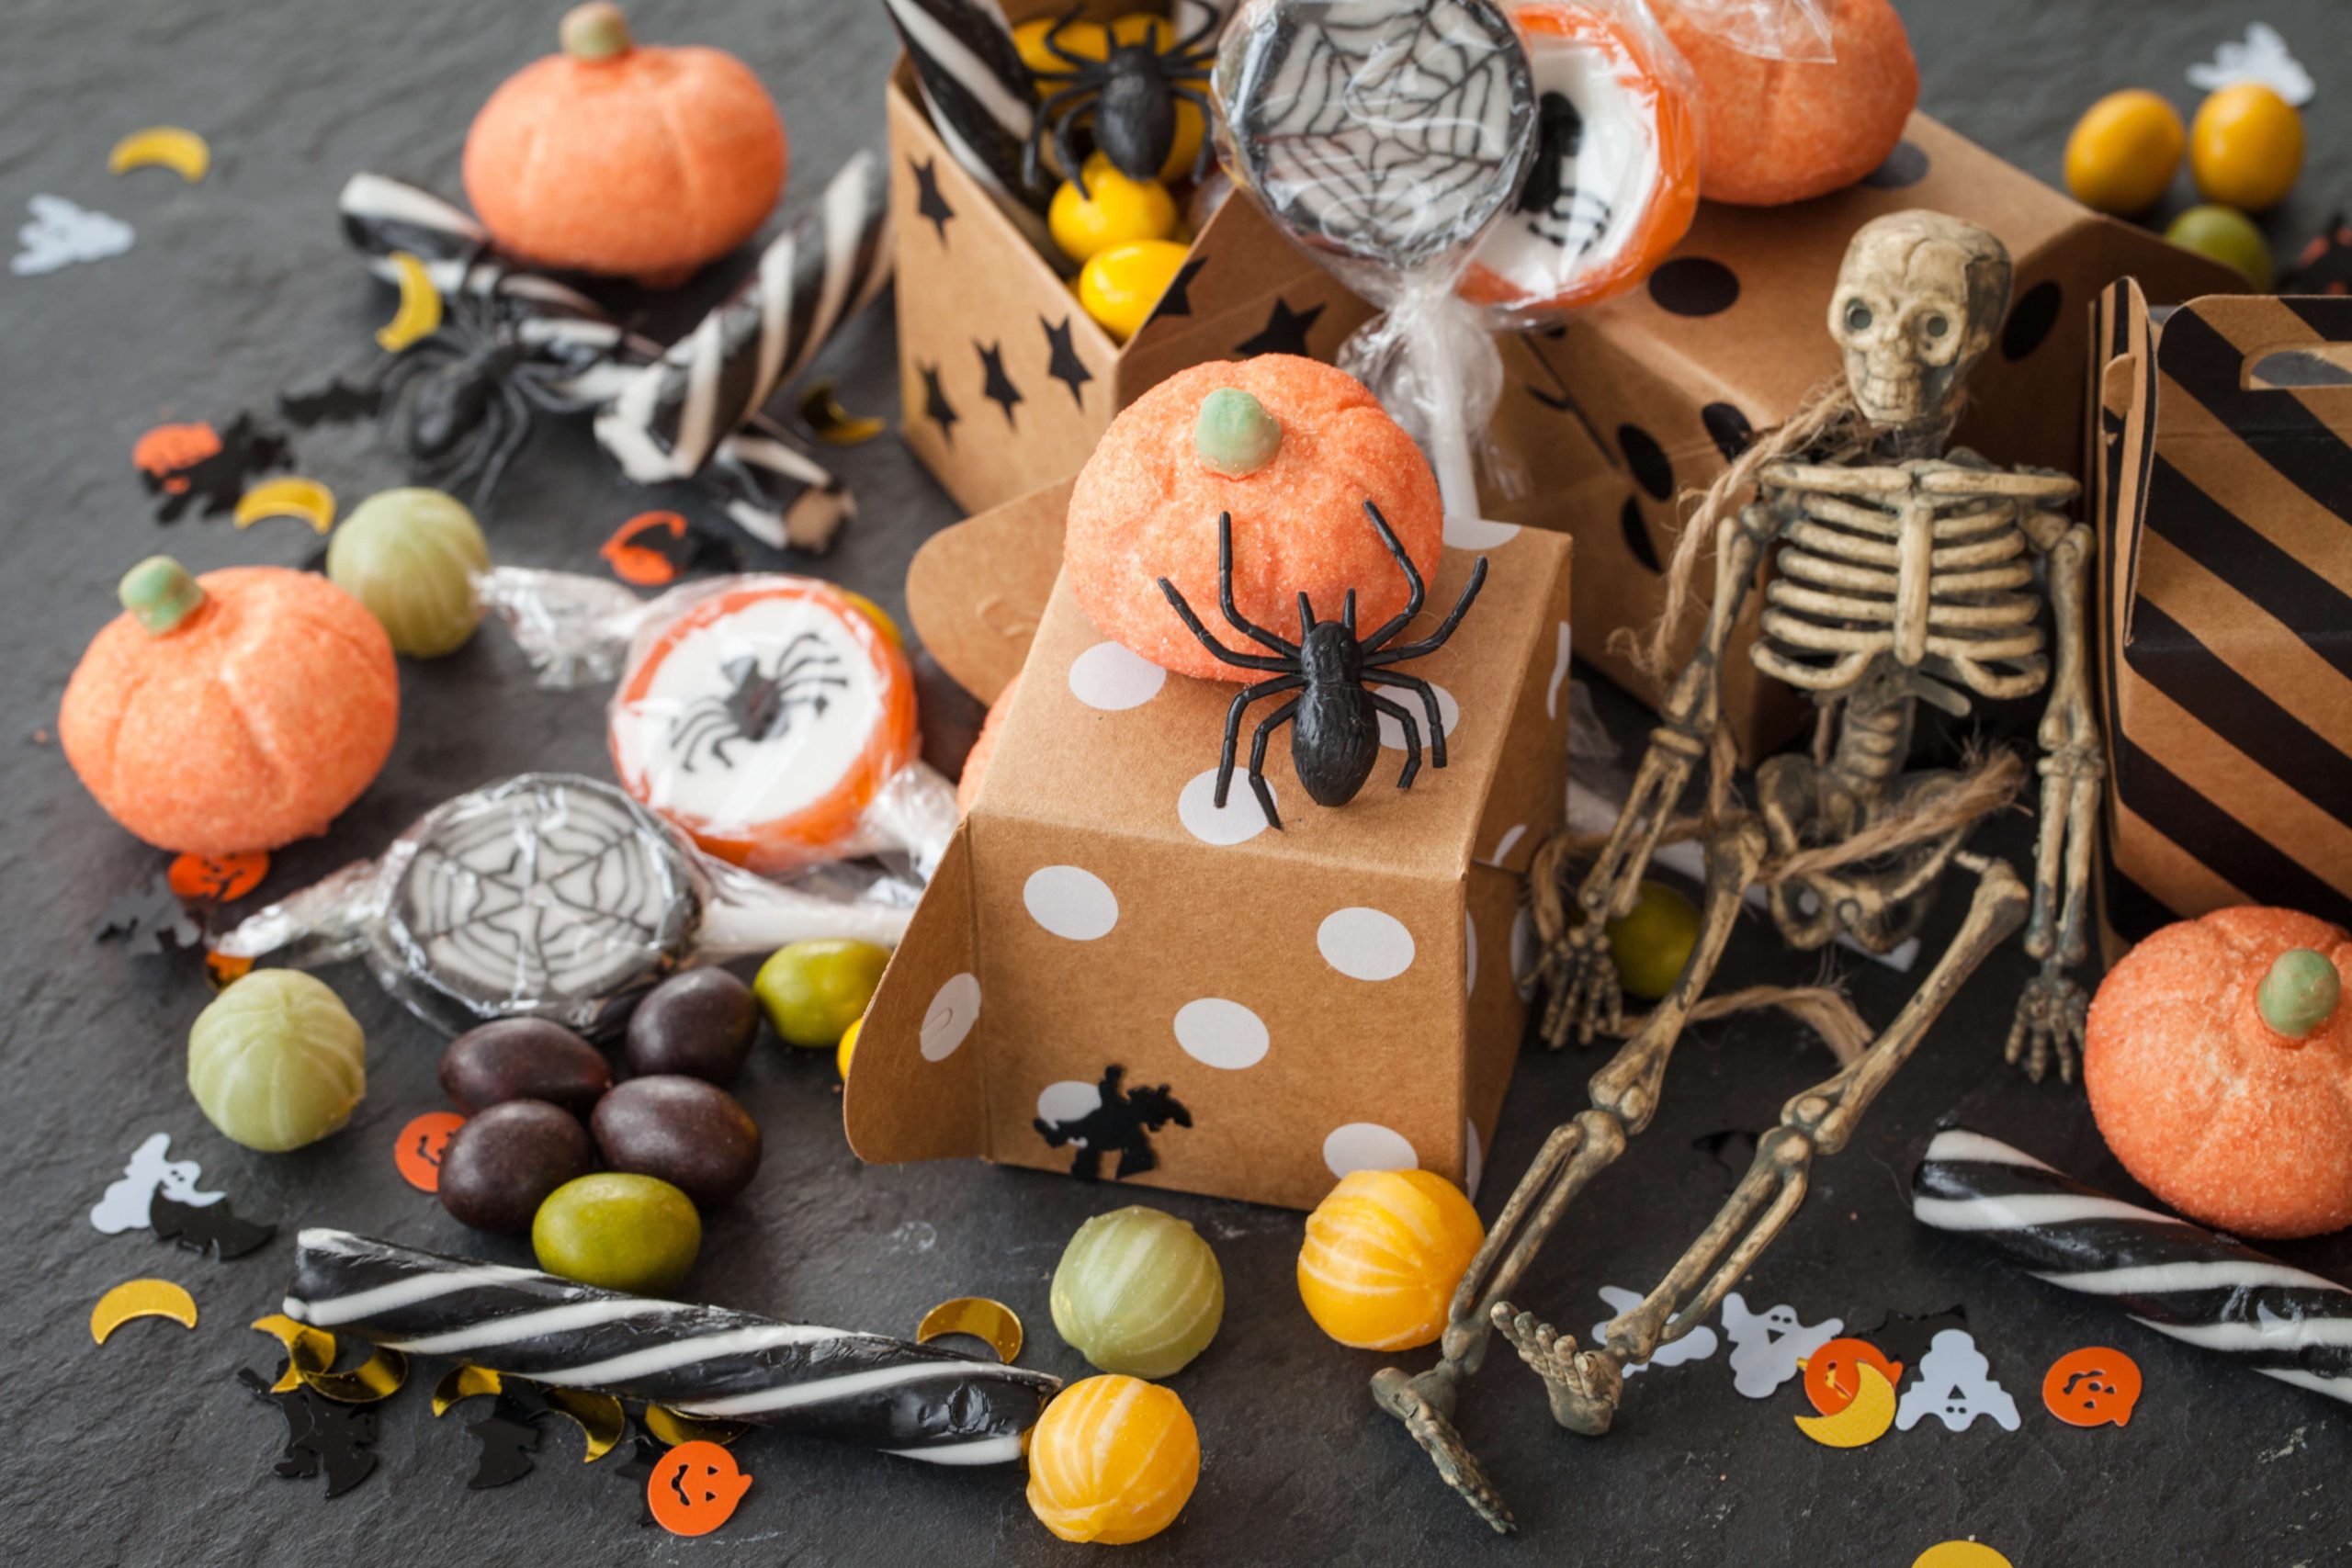 staged halloween candy with fake insects and skeleton